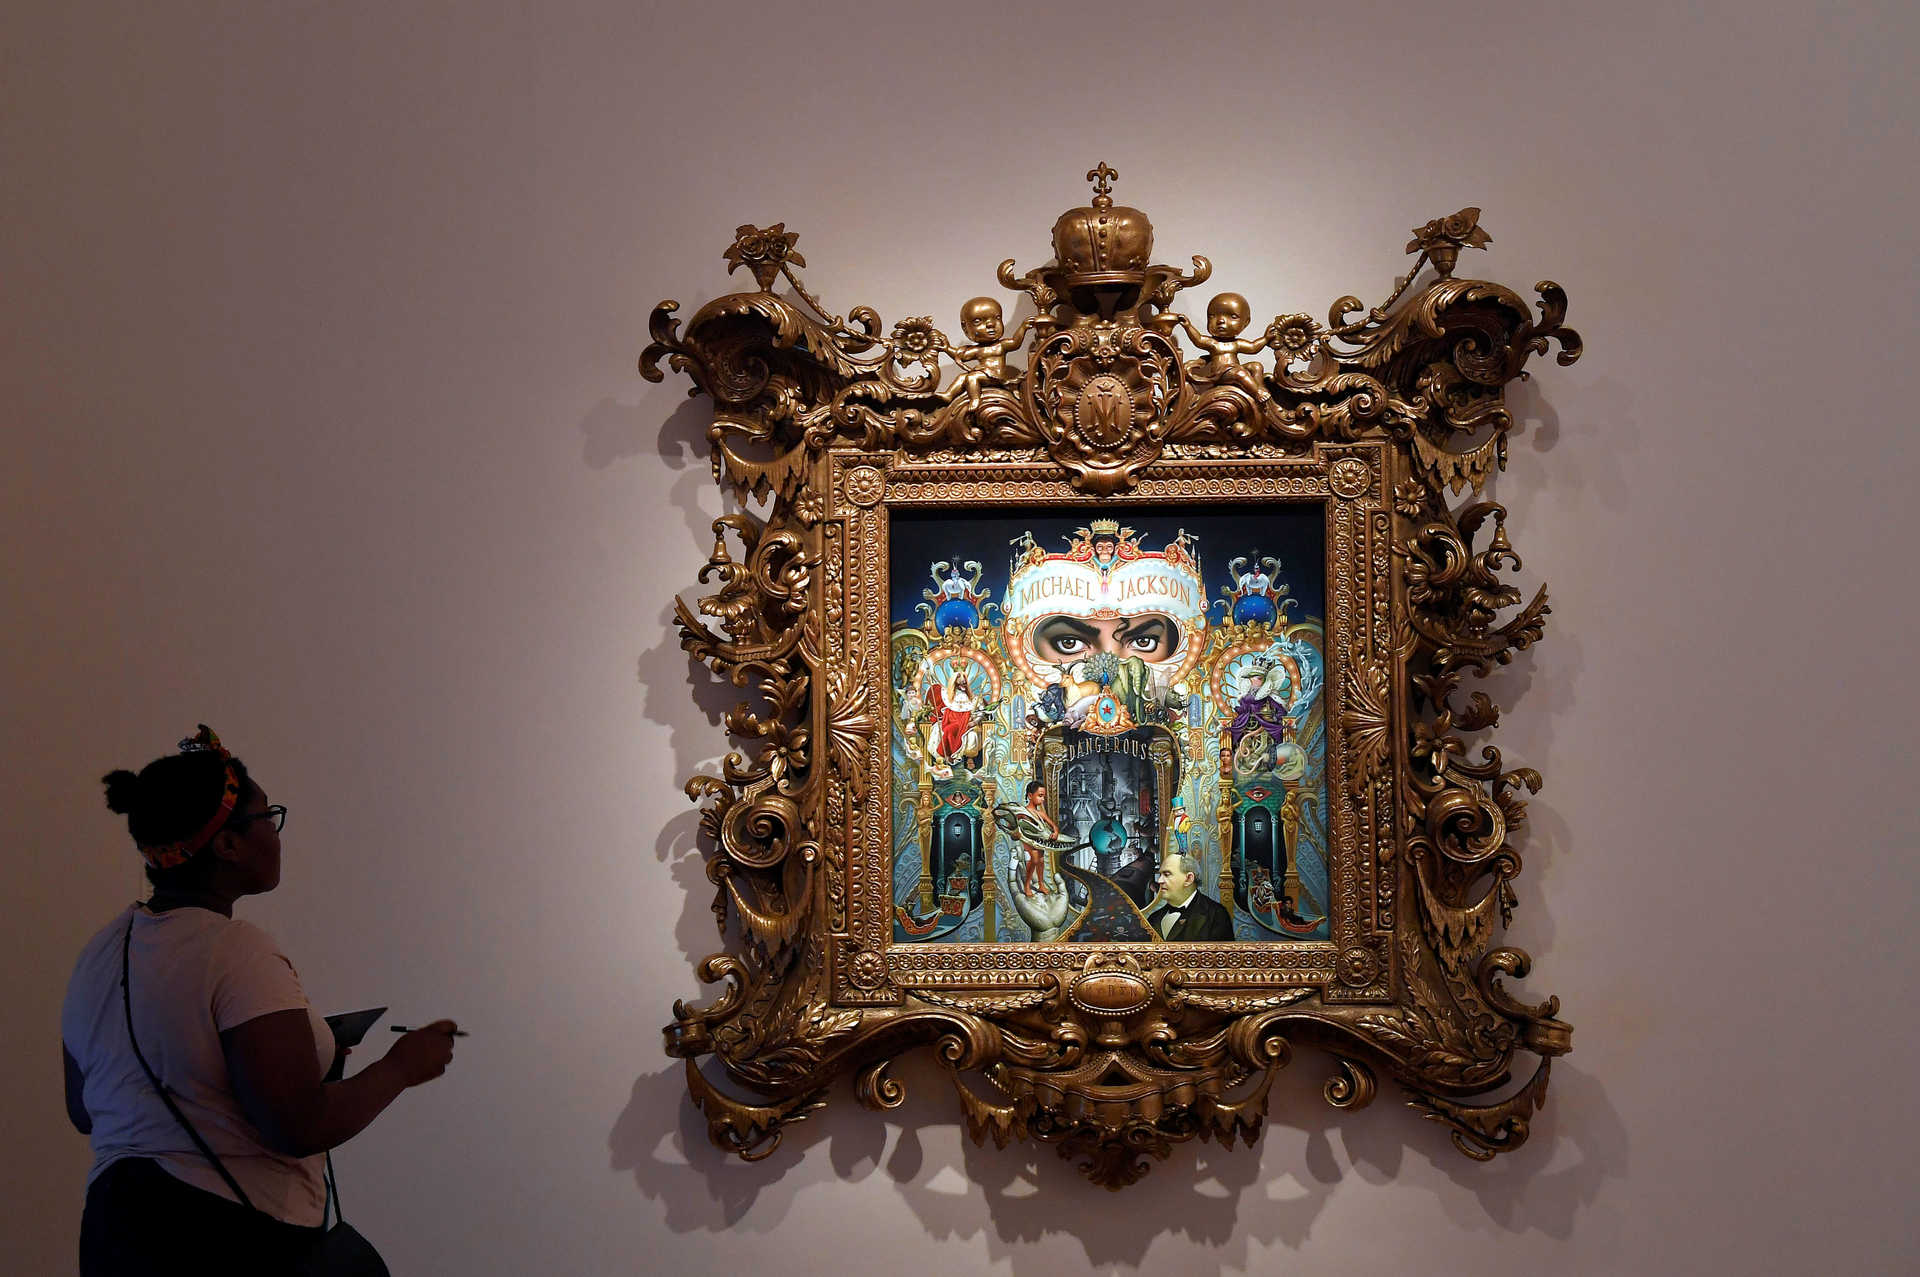 A visitor views ‘The King of Pop’ by Mark Ryden which forms part of the exhibition ‘Michael Jackson: On The Wall’ at the National Portrait Gallery in London, Britain